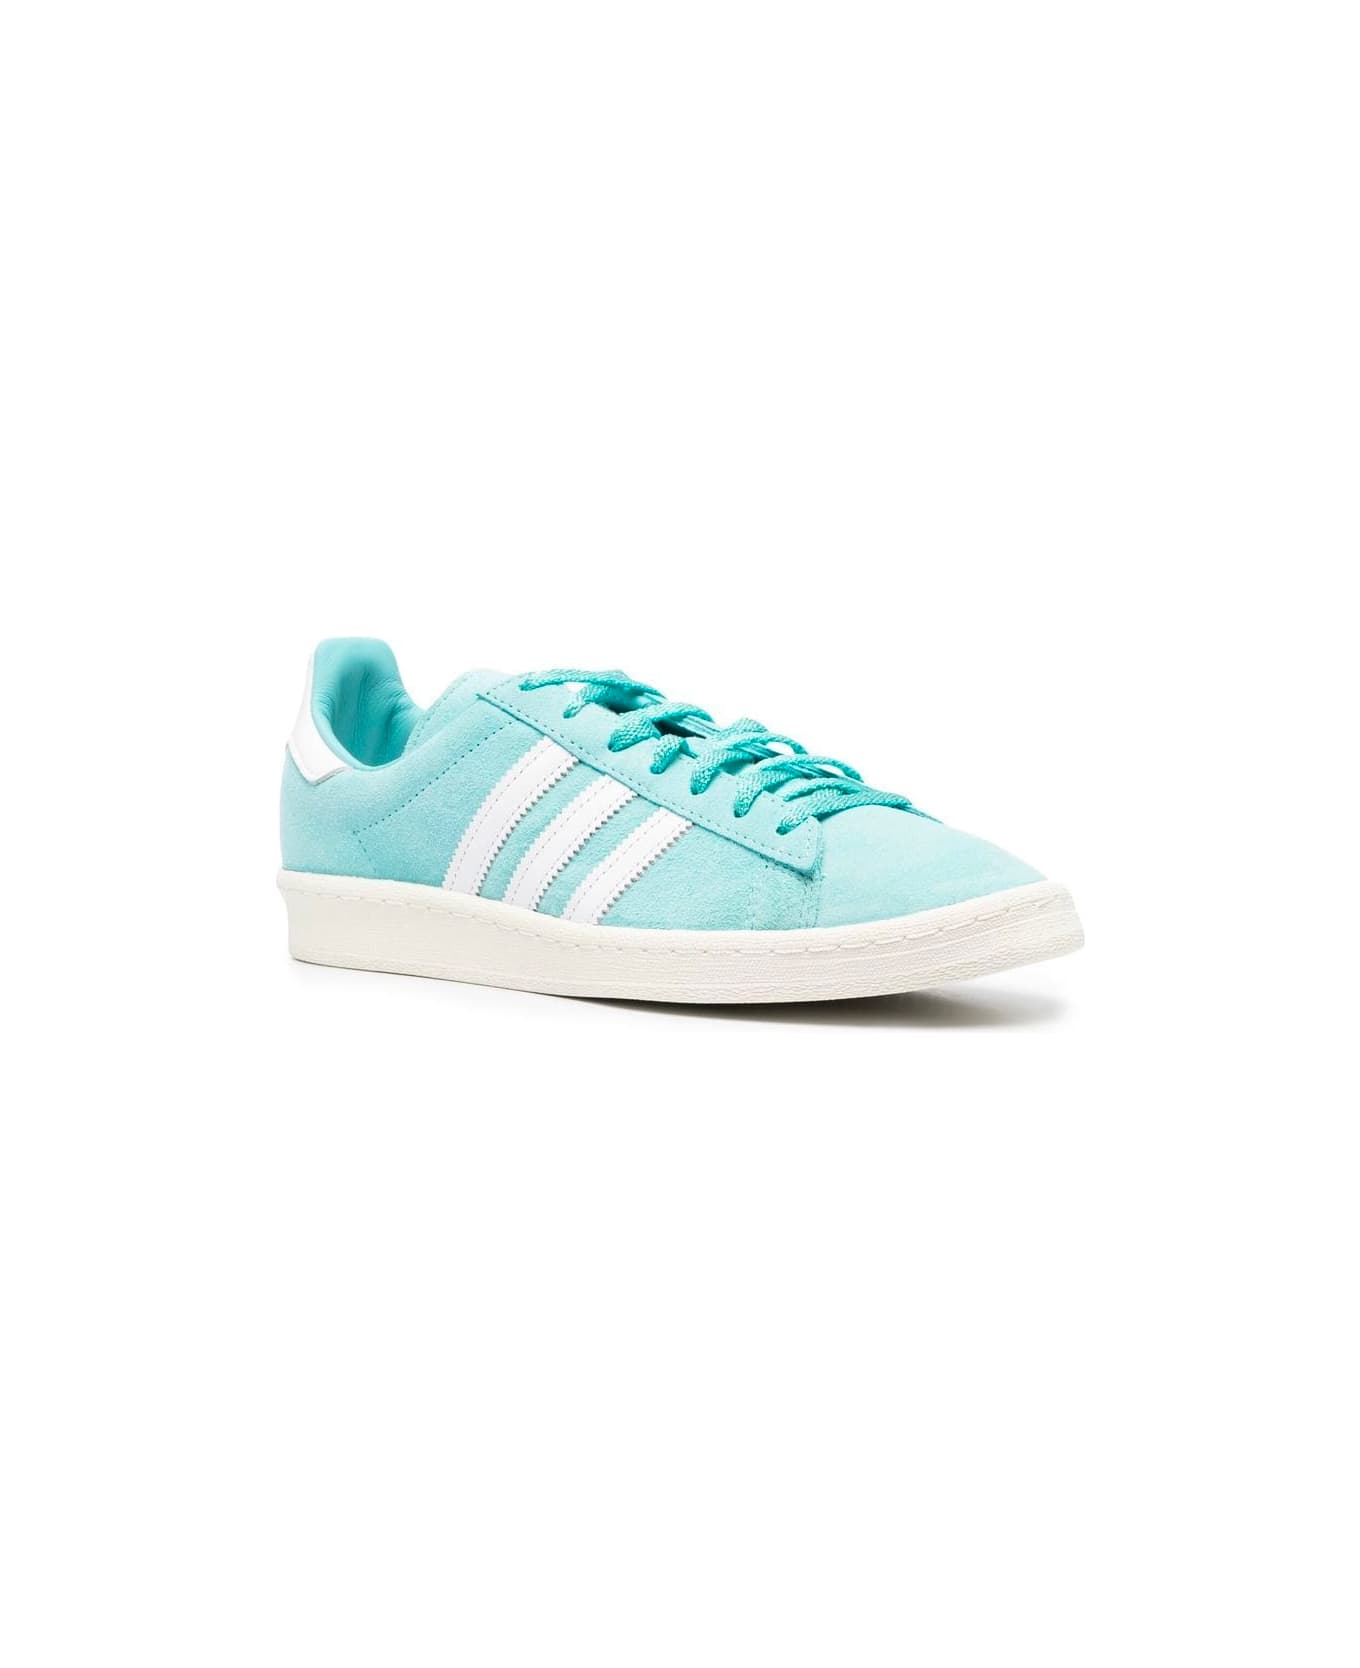 Adidas Campus 80s Sneakers - Easmin Ftwwht Owhite